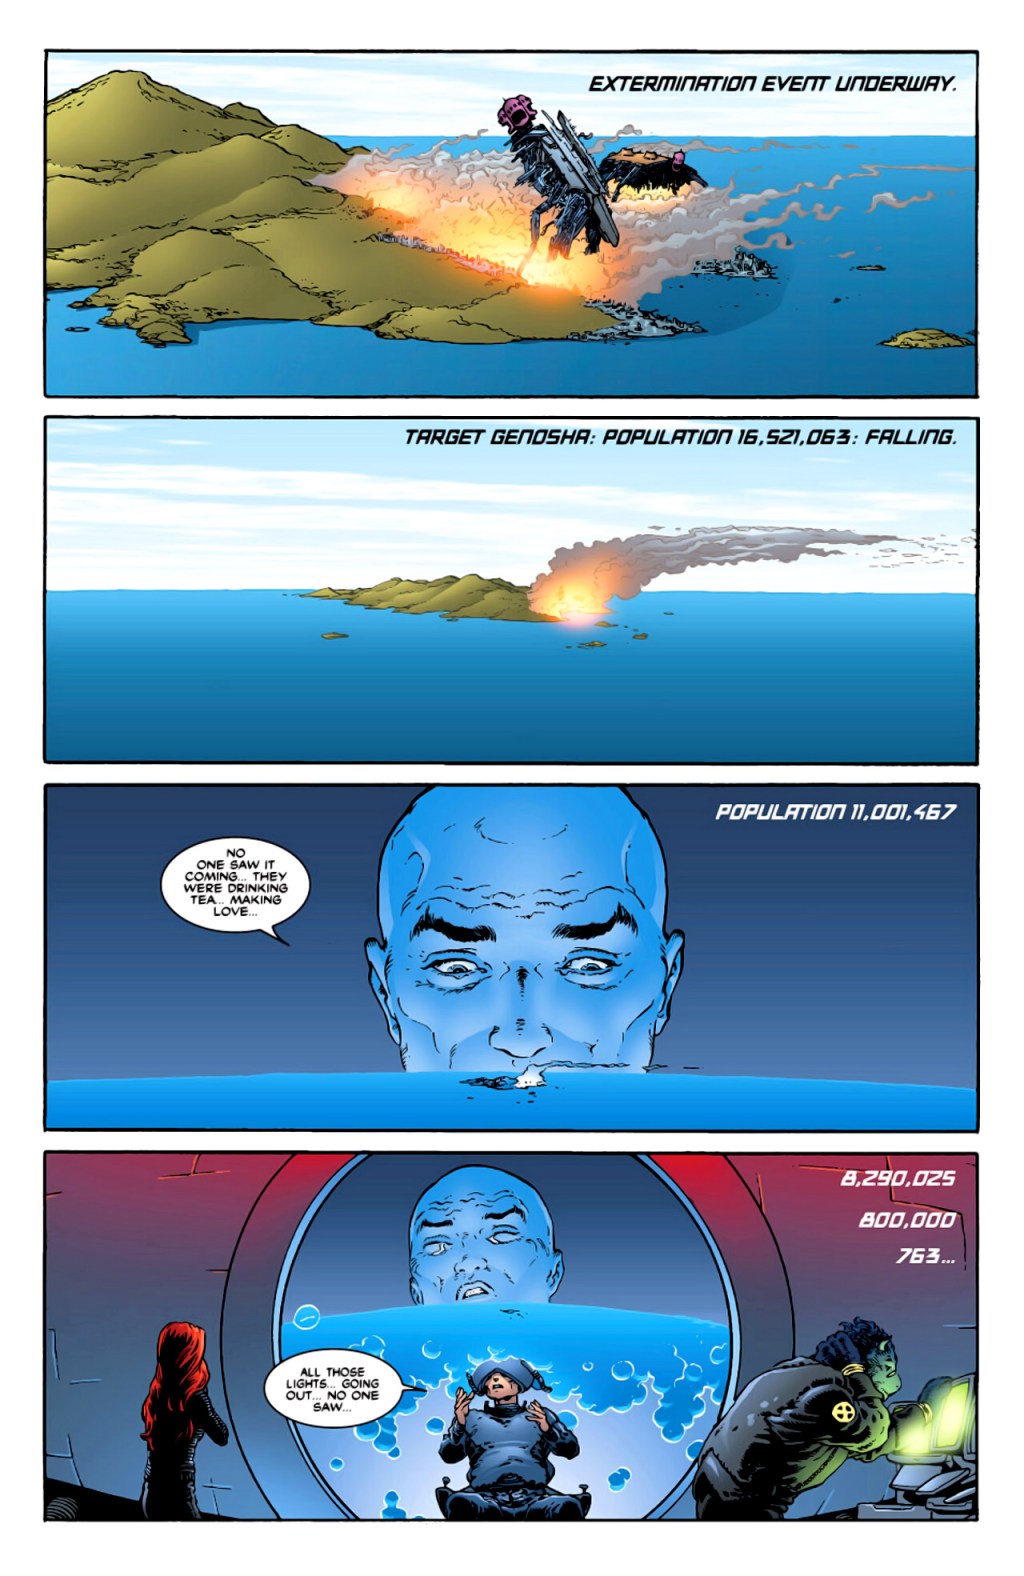 Charles Xavier watches in horror as Cassandra Nova commits genocide against the citizens of Genosha in New X-Men Vol. 1 #126 "E is for Extinction Part 2" (2002), Marvel Comics. Words by Grant Morrison, art by Frank Quitely, Tim Townsend, and Brian Haberlin.